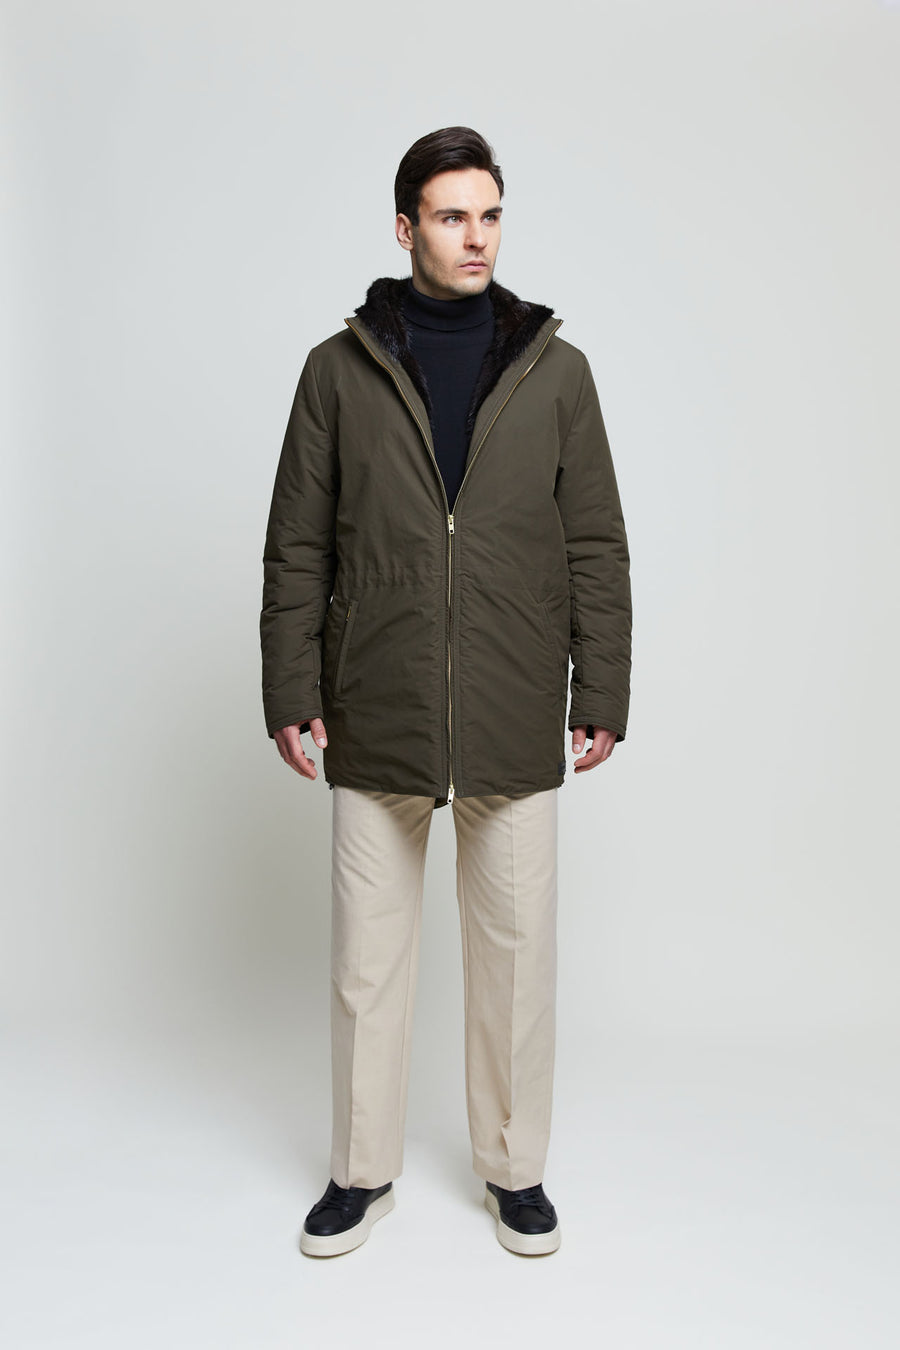 The shorter version of our men’s parka is a perfect city overcoat